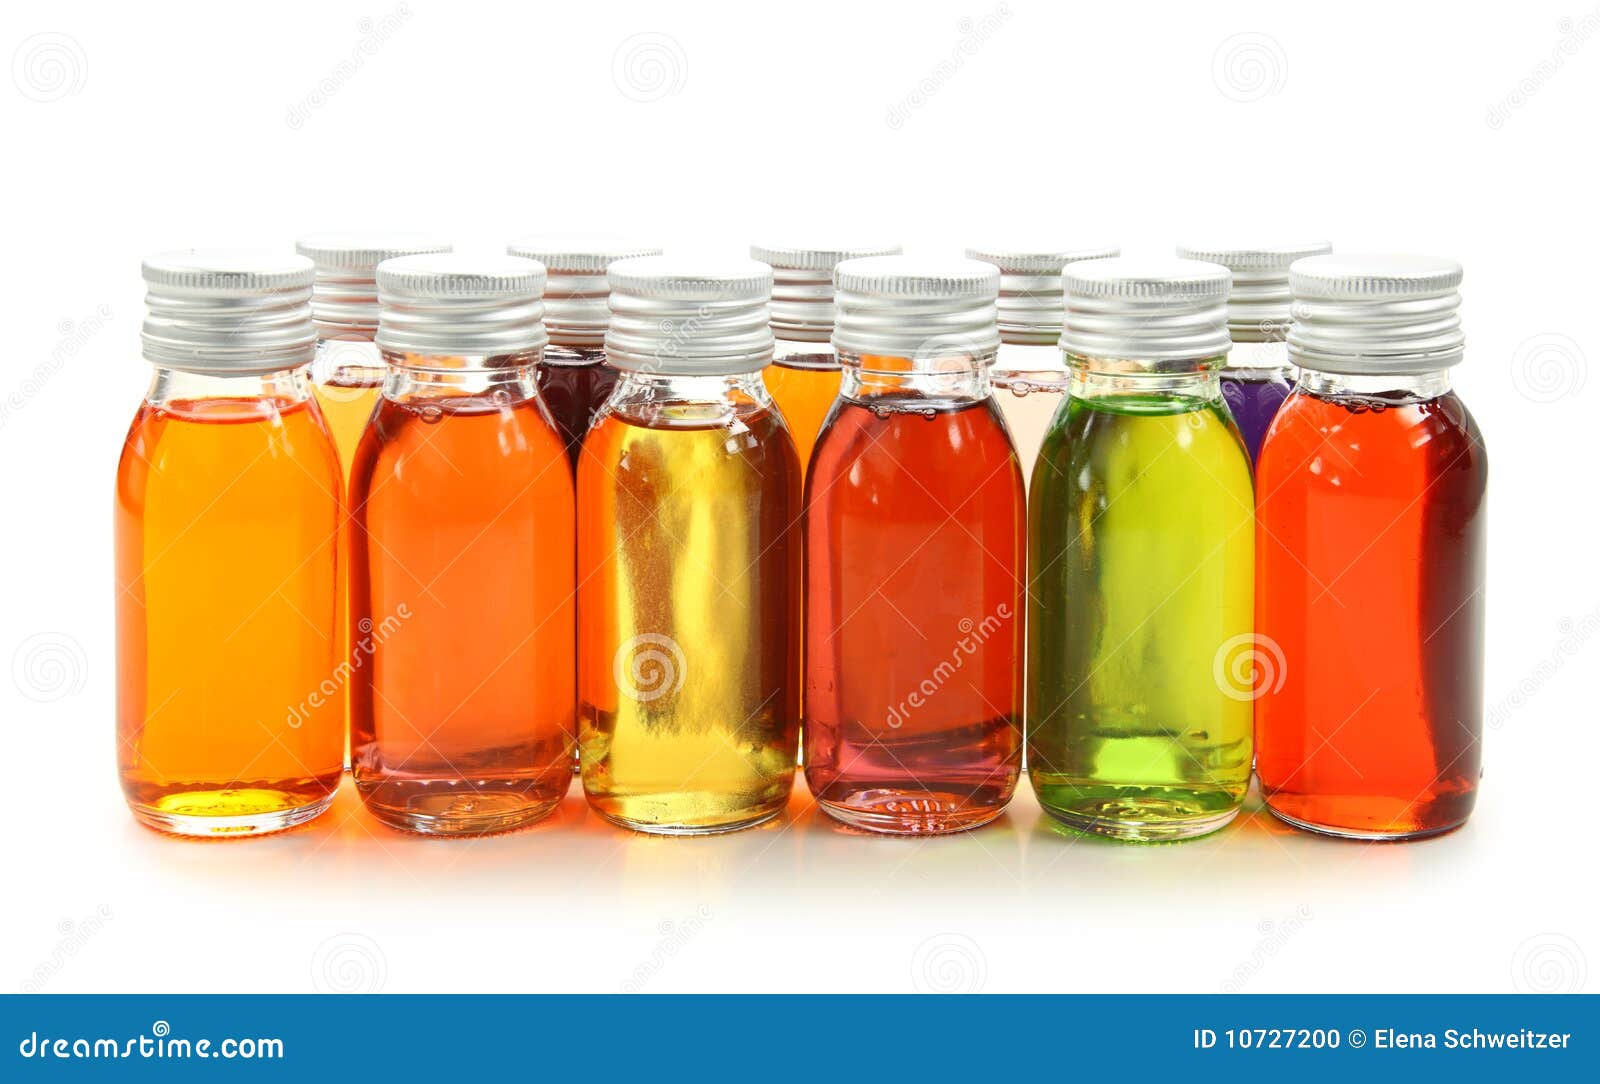 bottles with essential oils